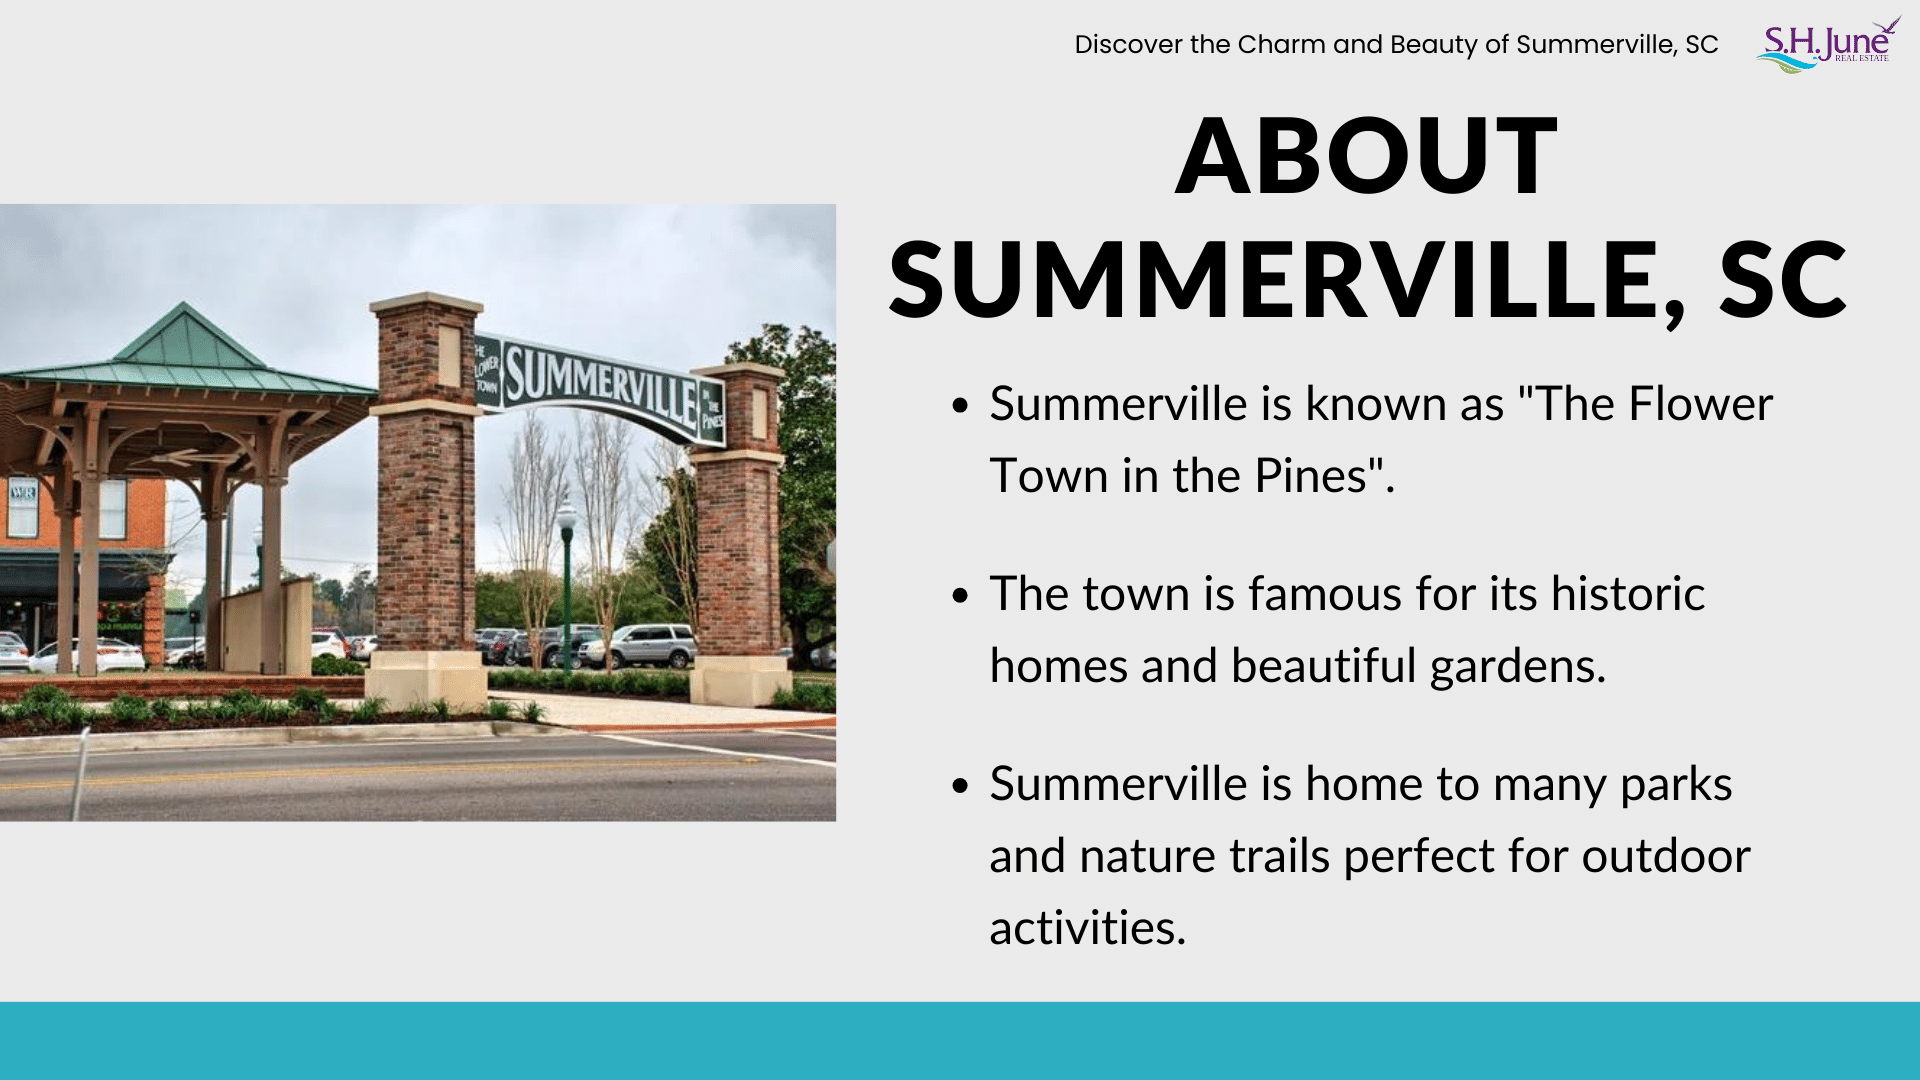 Summerville, SC Embrace Charm, Beauty, and Southern Hospitality S.H. June